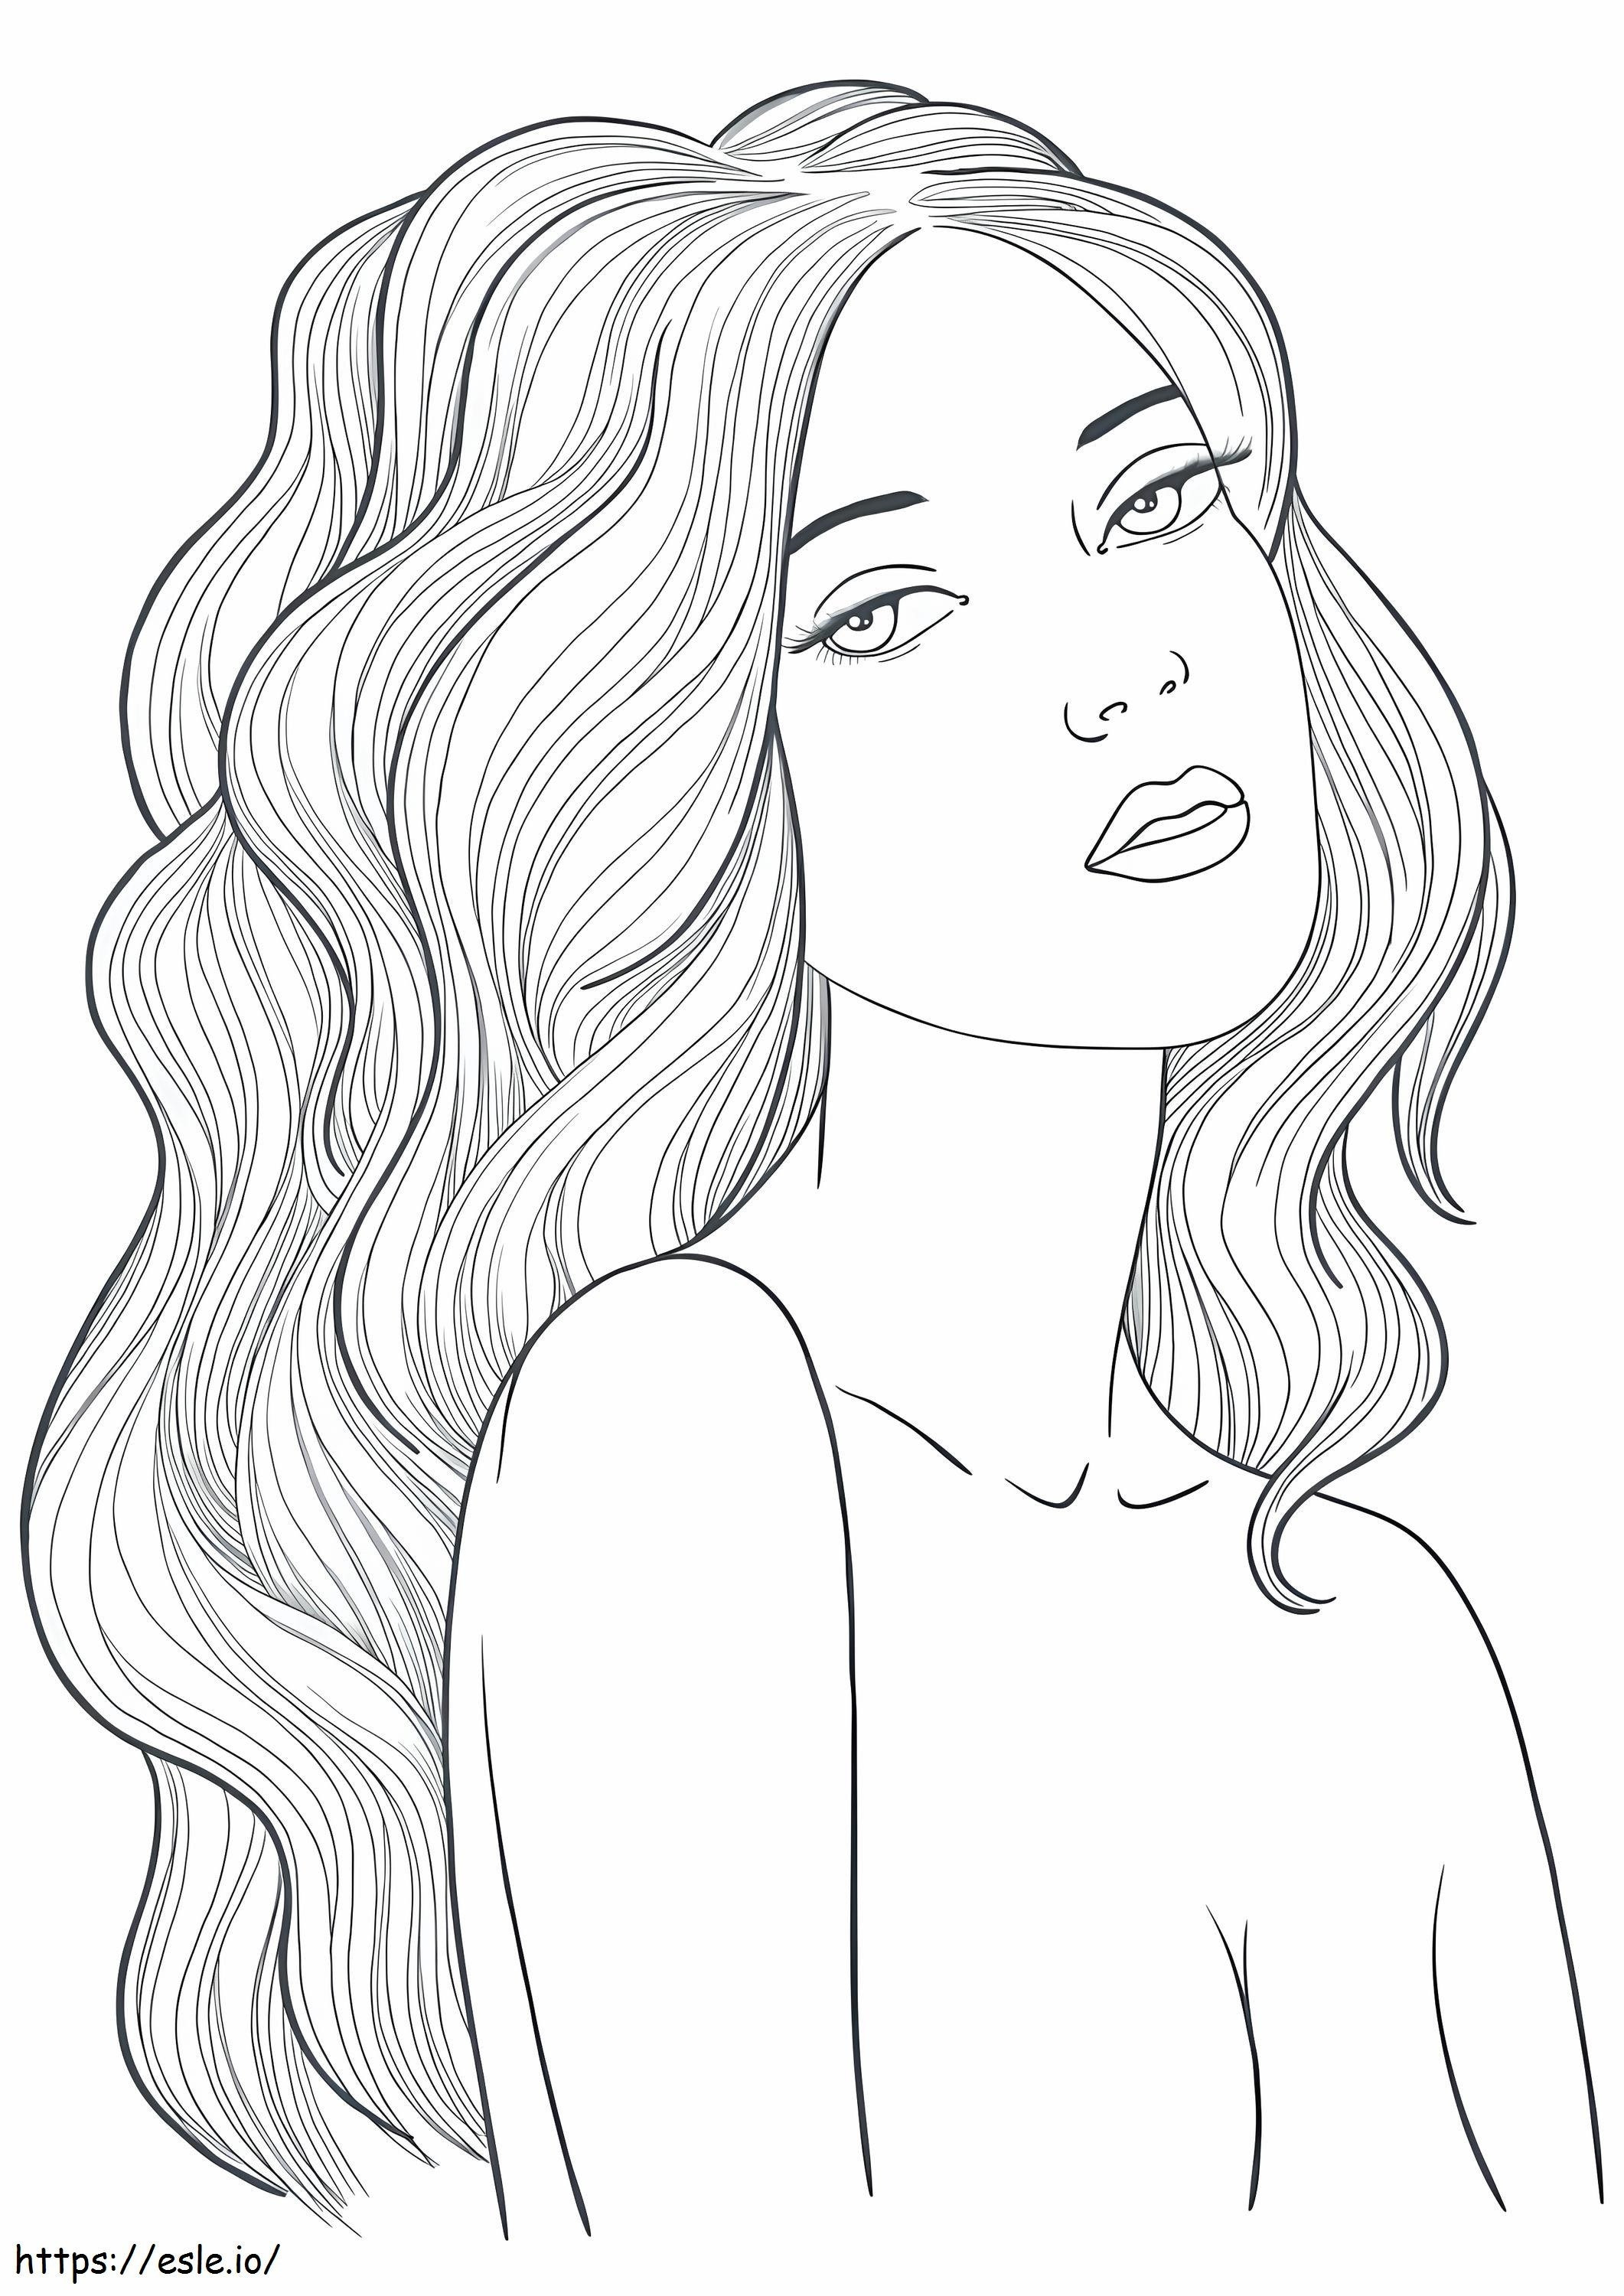 Girl With Beautiful Hair coloring page